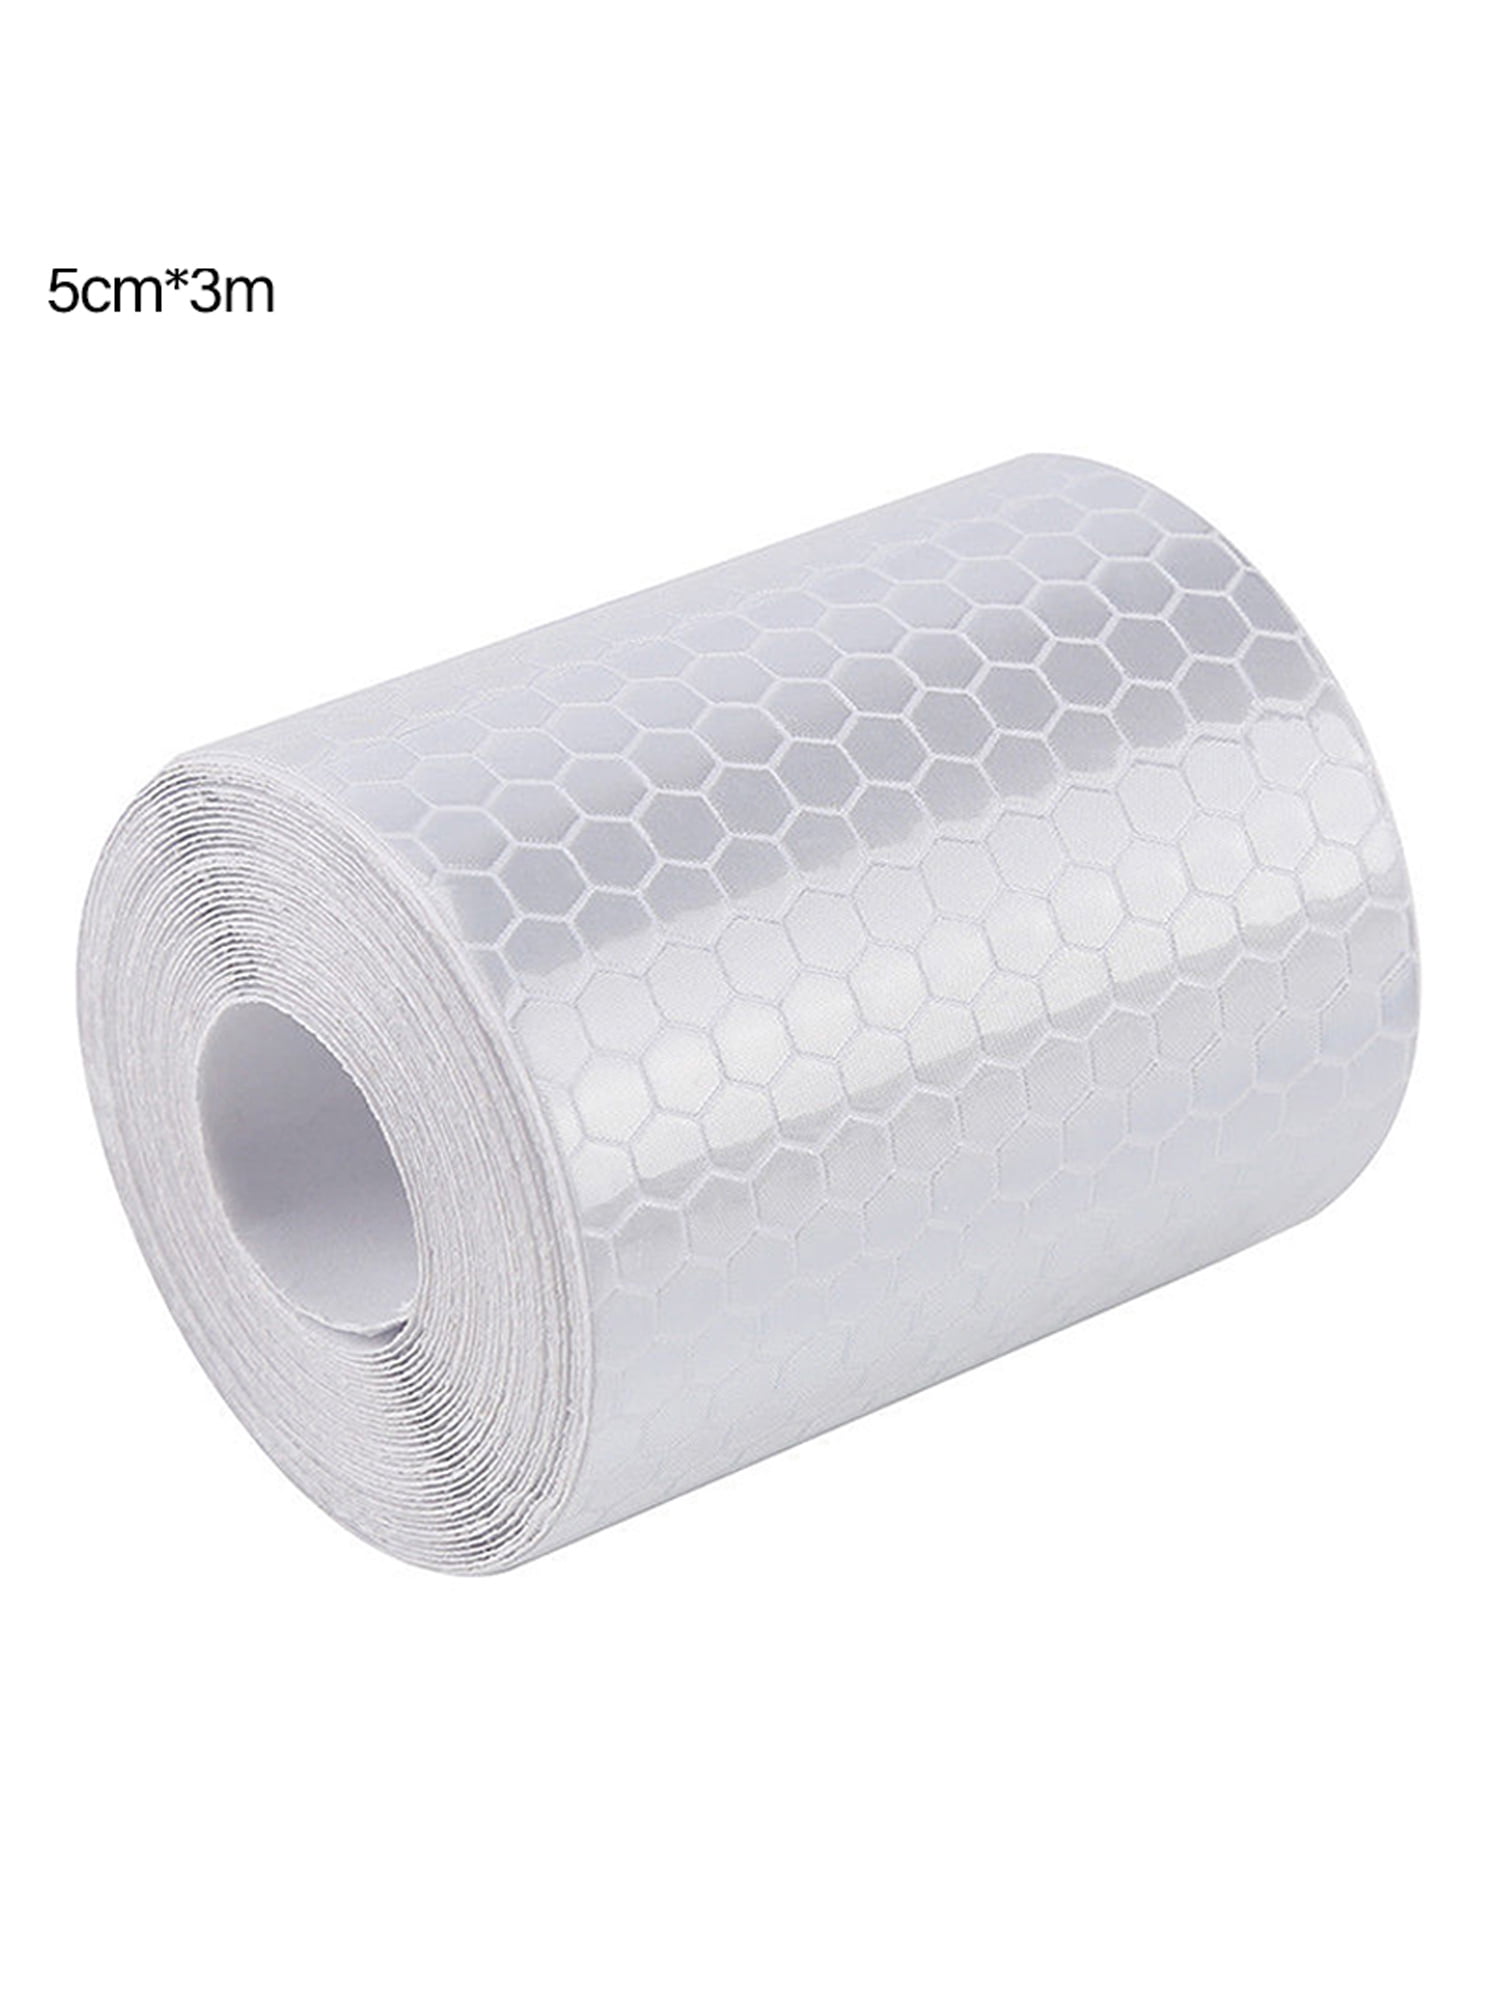 3m Car Truck Reflective Self-adhesive Safety Warning Tape Roll Film Sticker 